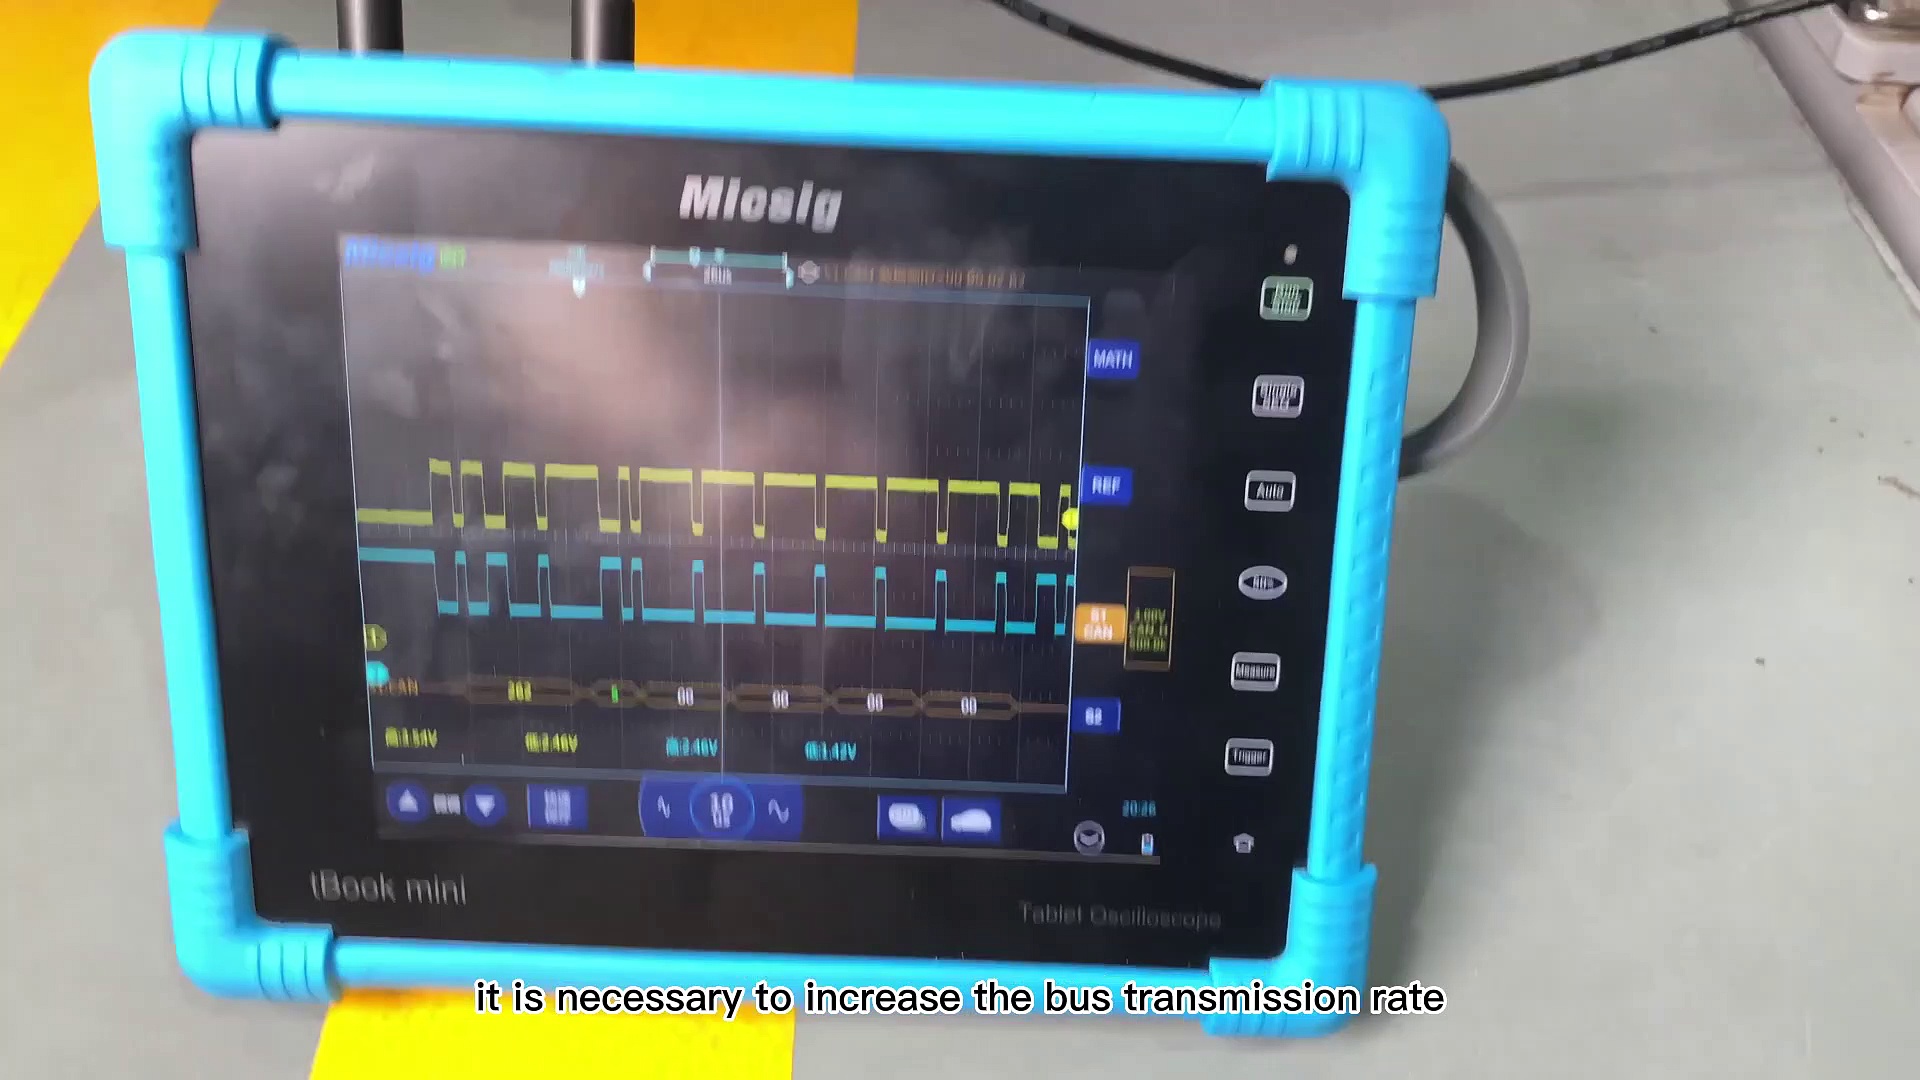 How to decode CAN FD bus signal with Micsig Automotive Oscilloscope